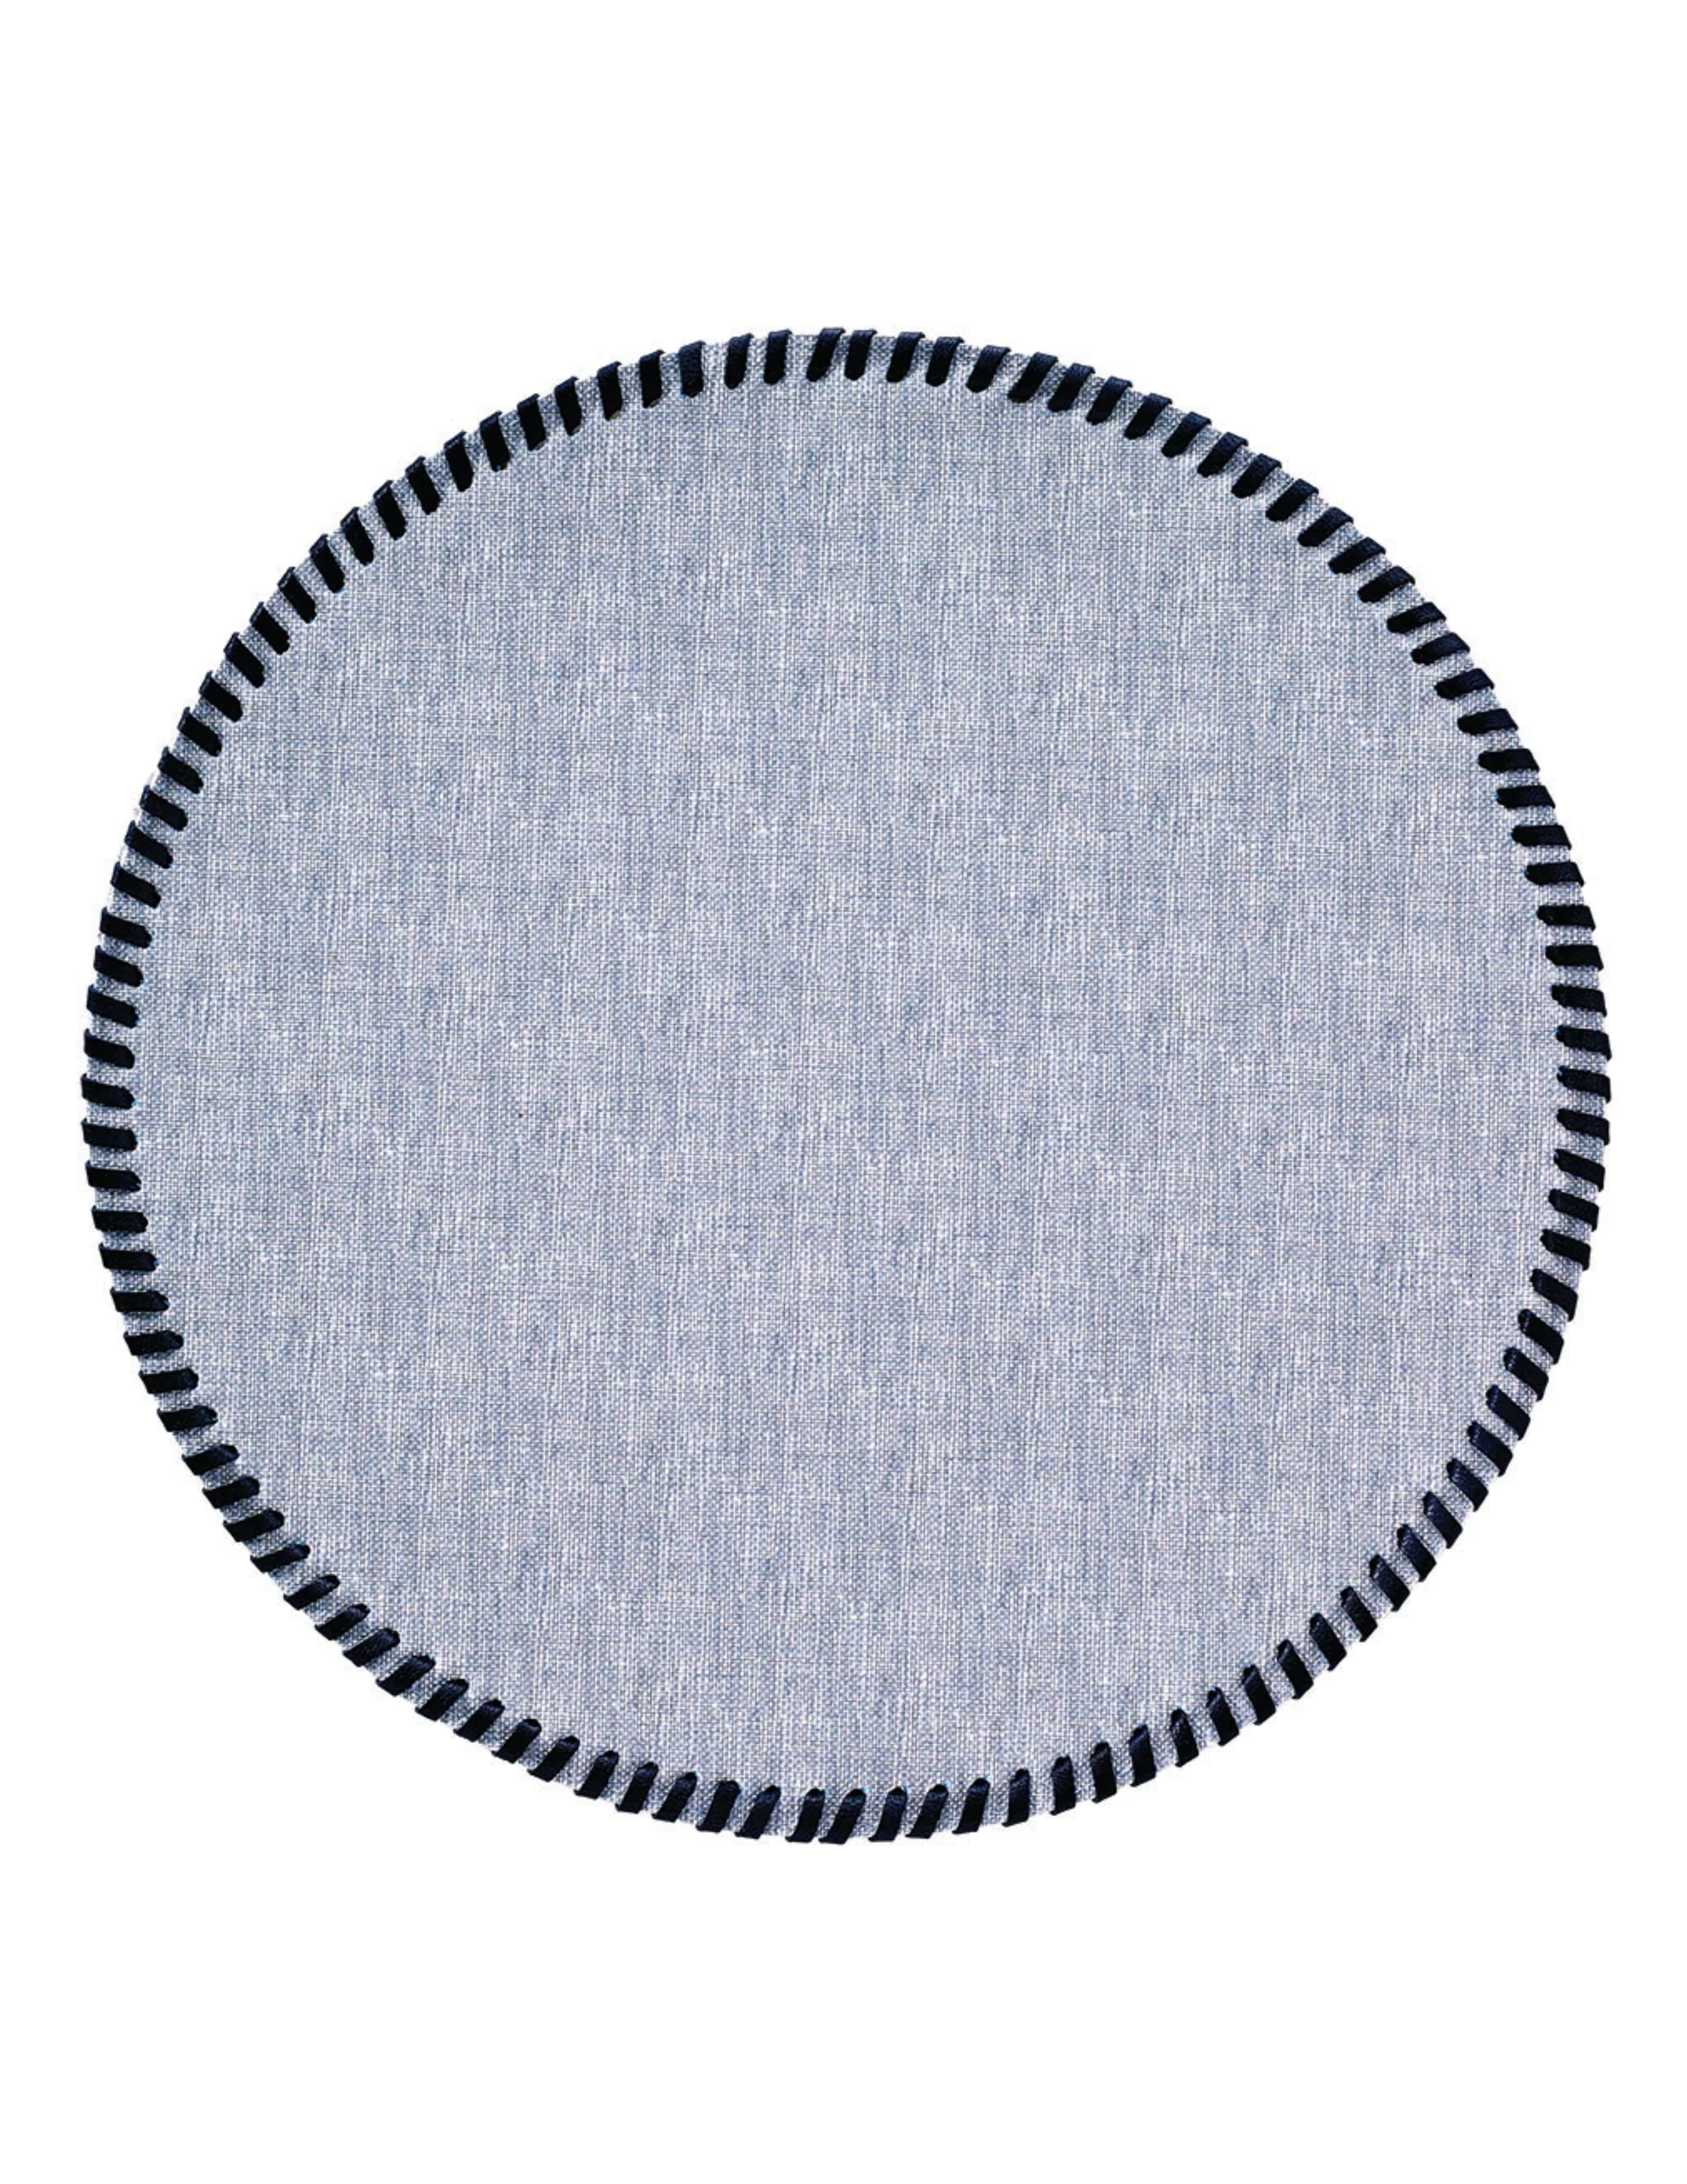 Wipstitch Round Placemat Set of 4 - Bluebell